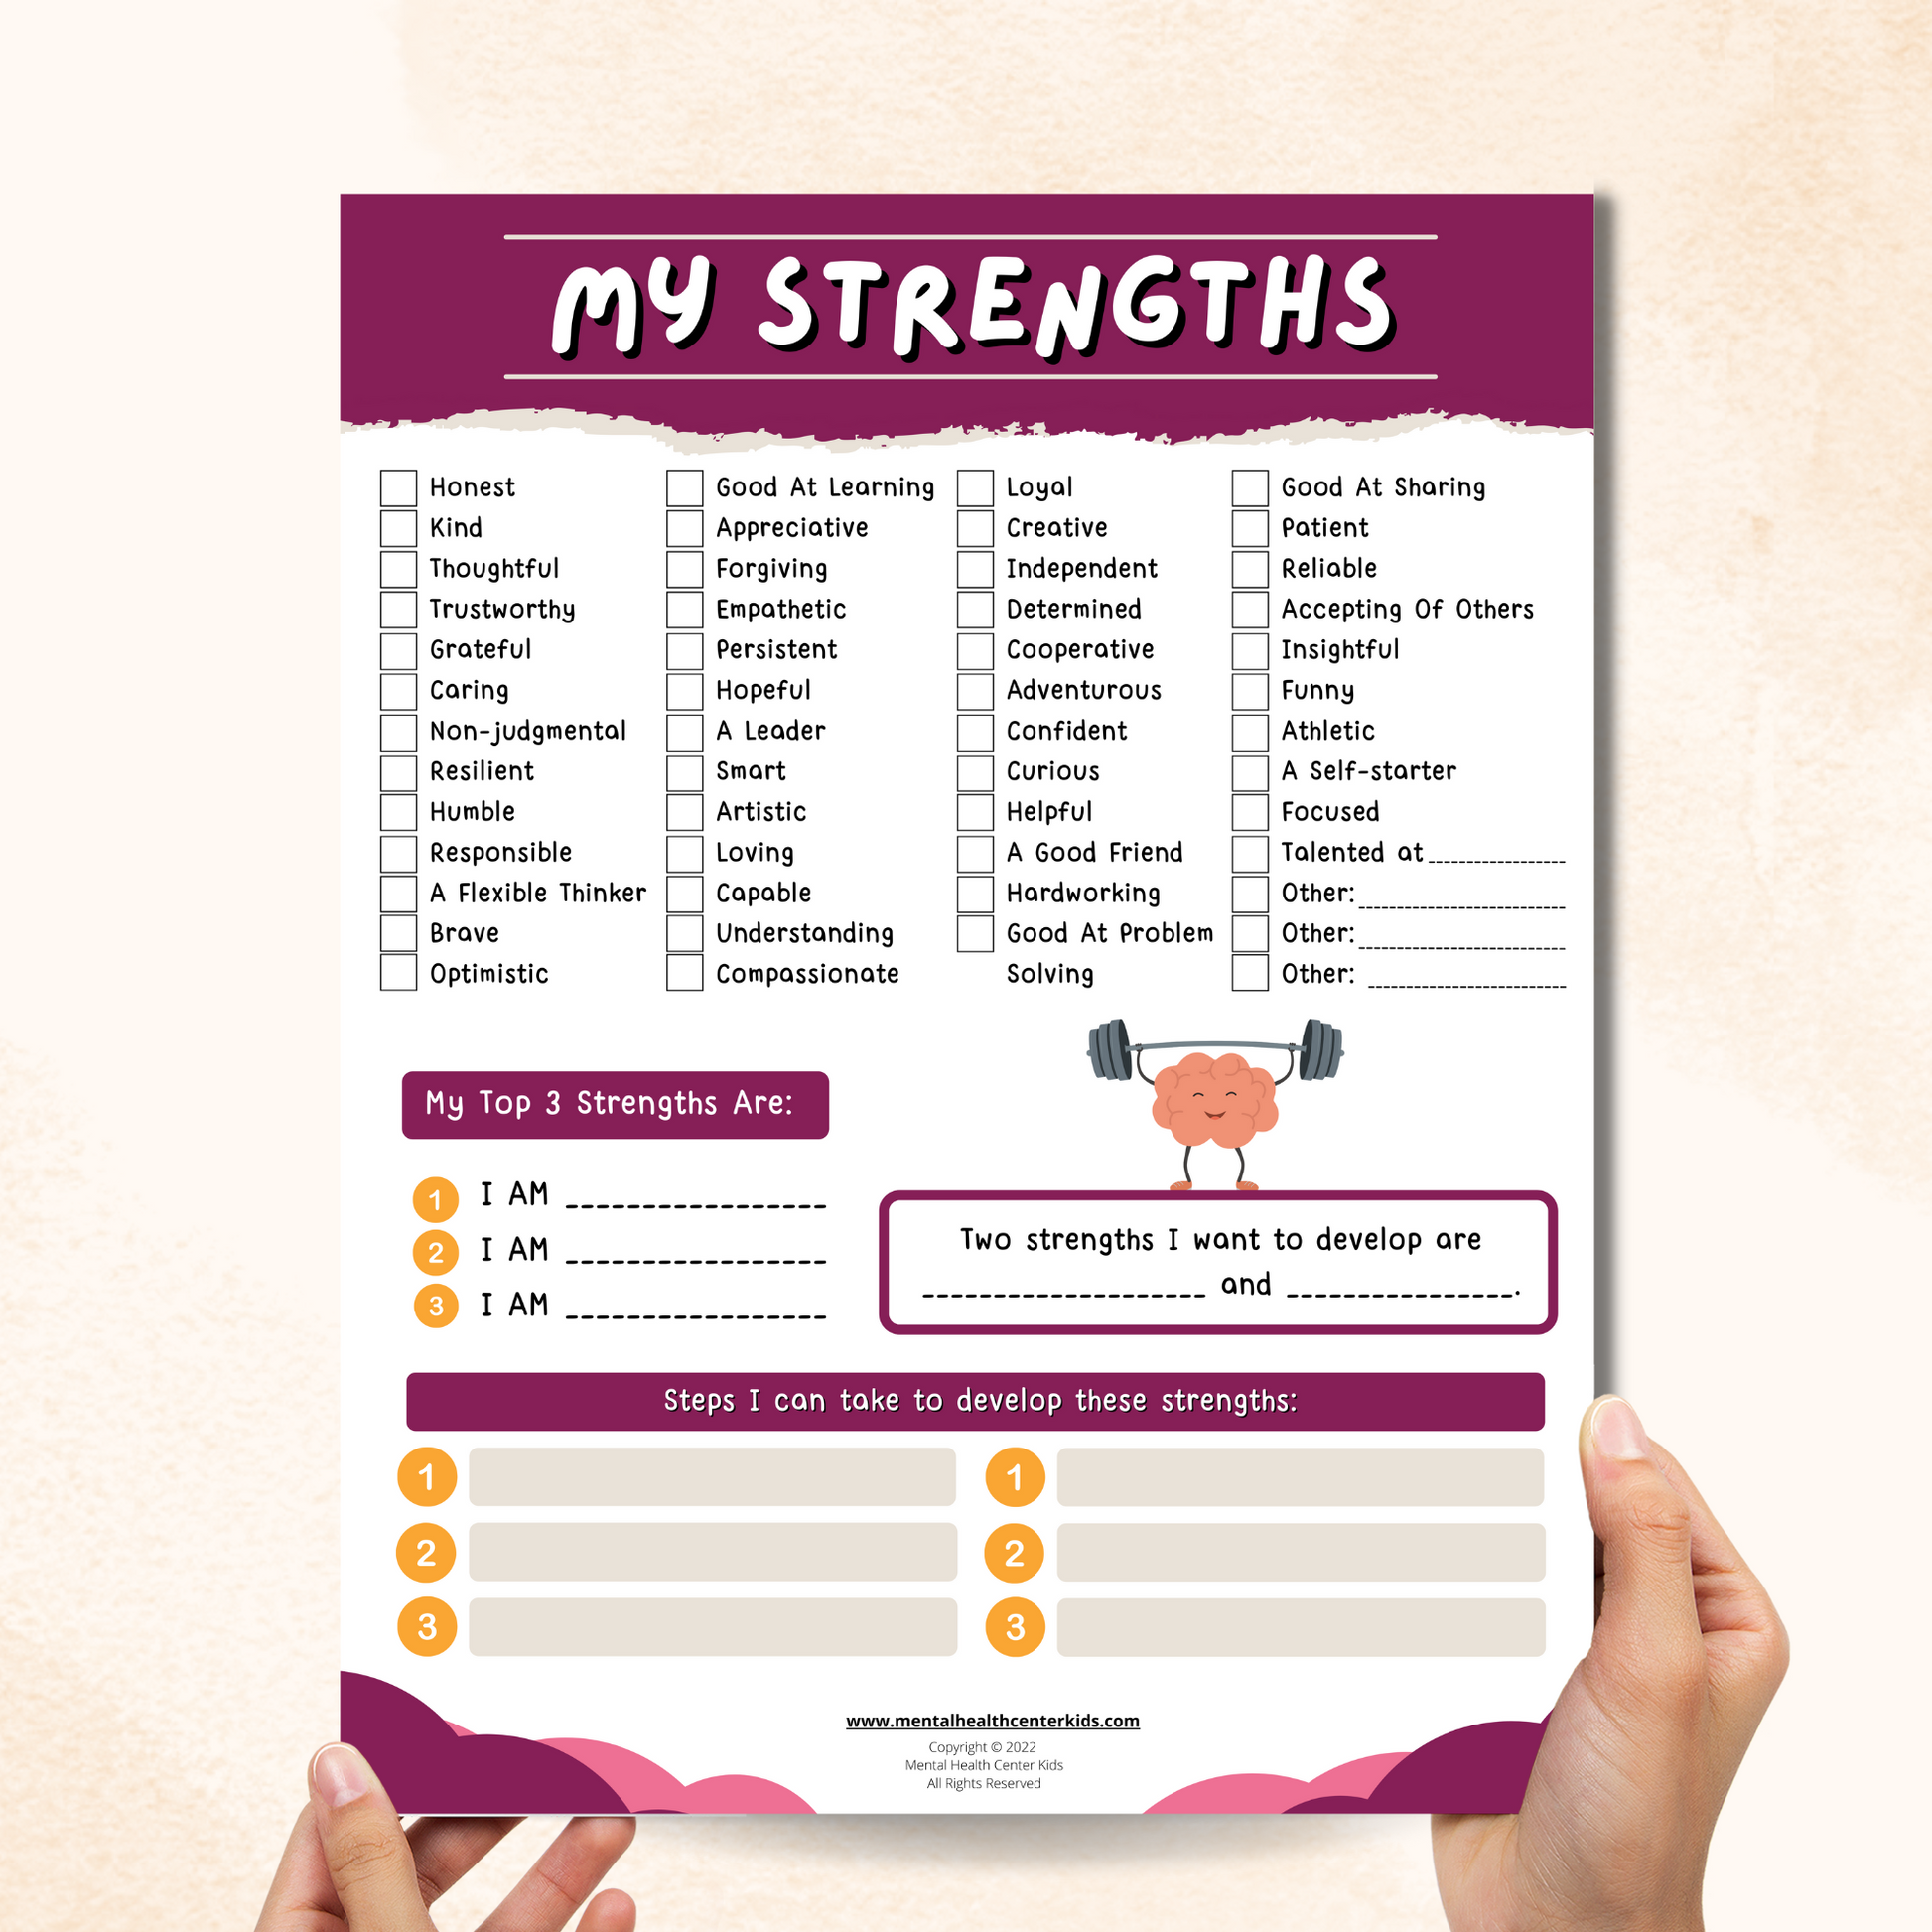     My_Strengths_Updated